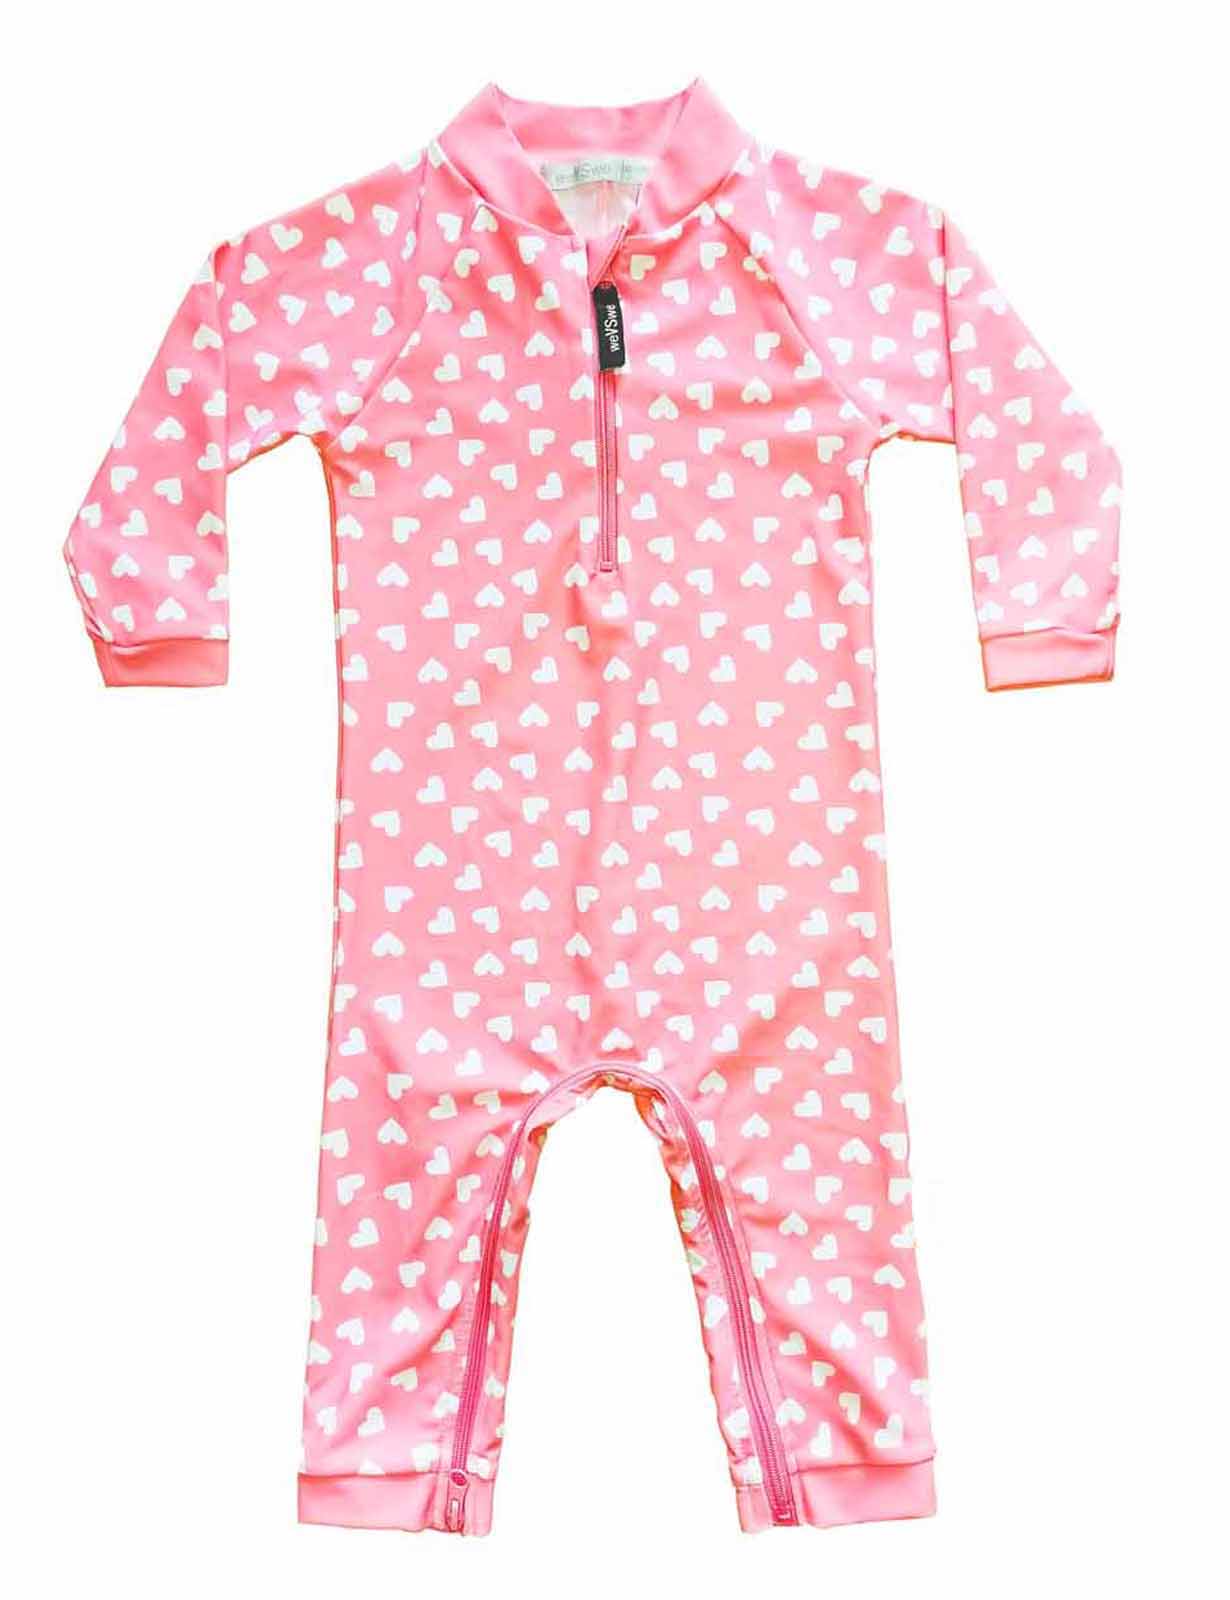 UAM-002(6-12) weVSwe Baby Toddler Sun Protection Rash Guard One Piece Pink Heart Girls Swimsuit Crotch Zipper for Easy Diaper Changes